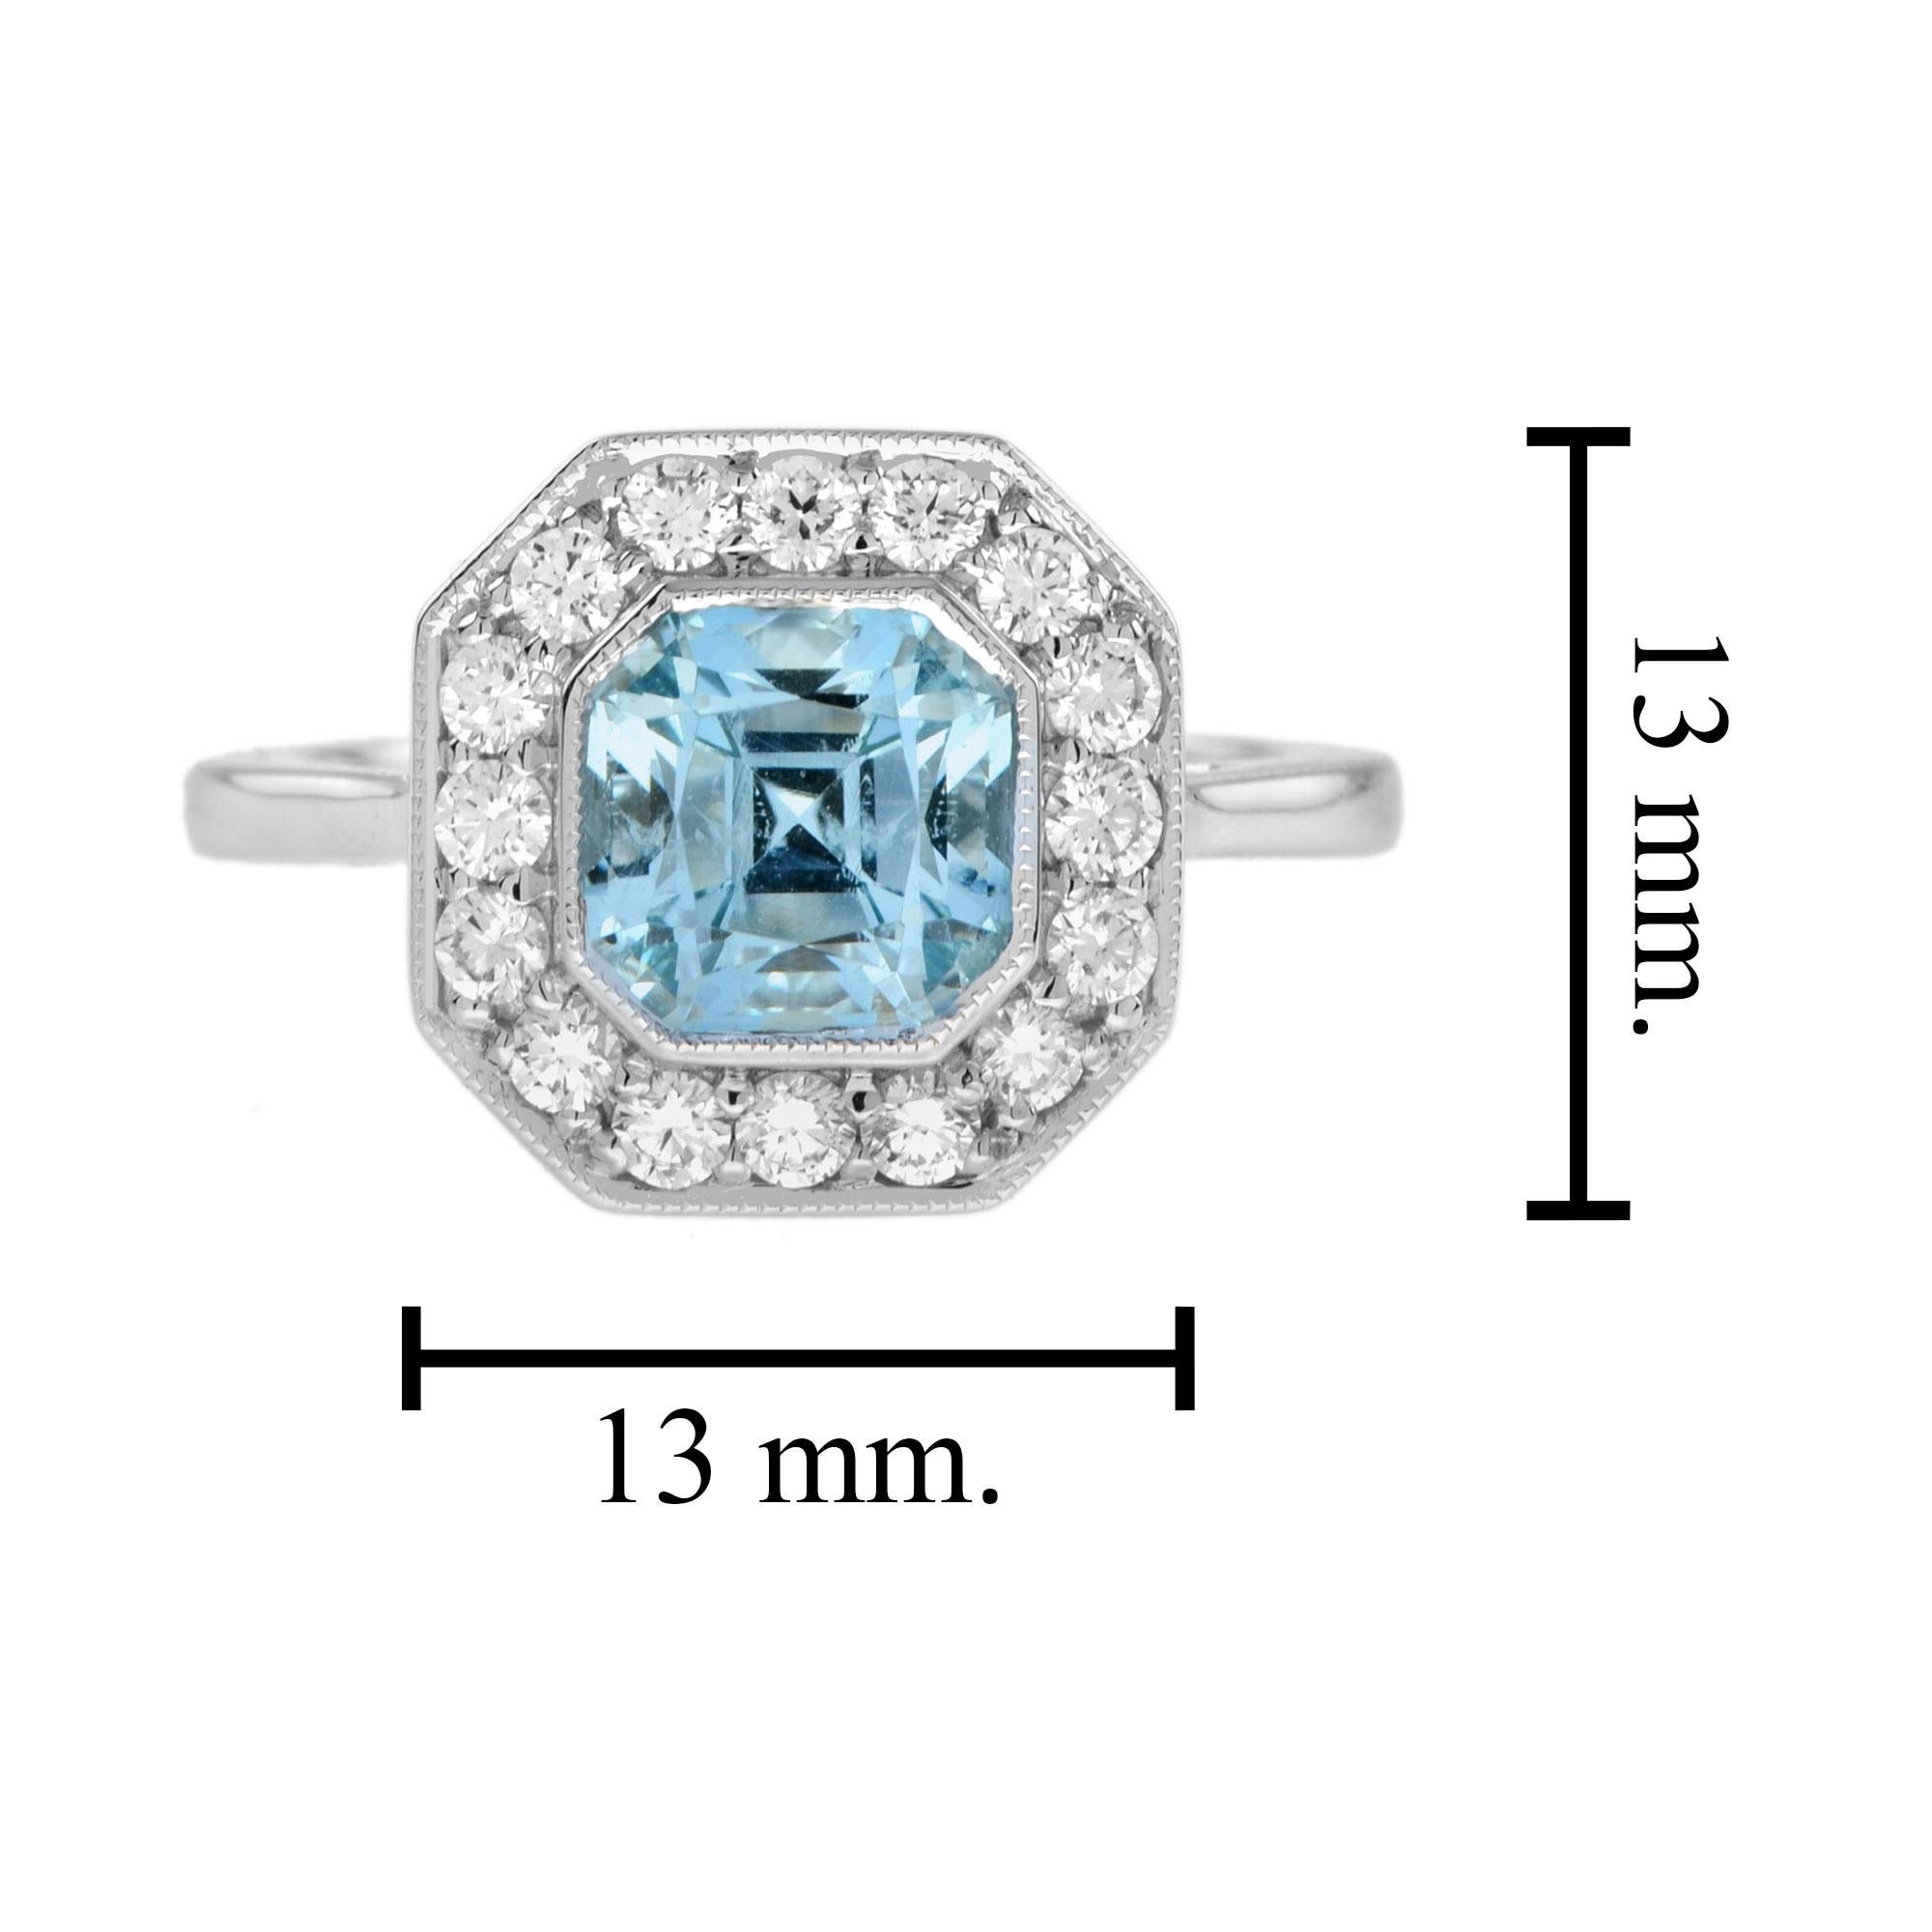 For Sale:  2.7 Ct. Blue Topaz and Diamond Art Deco Style Halo Engagement Ring in 14K Gold 7